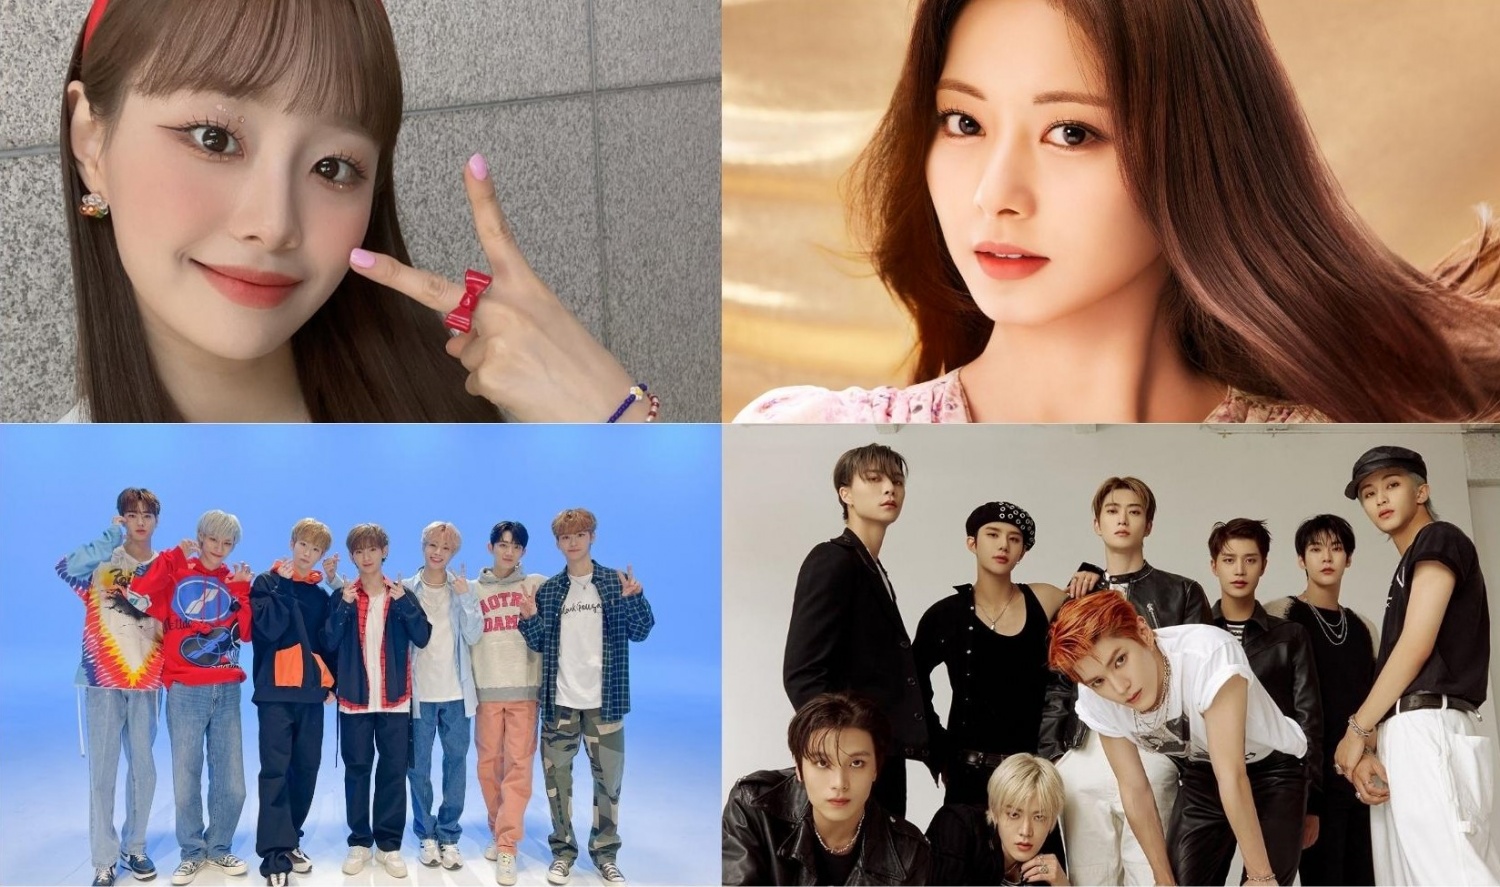 IN THE LOOP: “Ay-Yo” NCT 127, BlockBerry Creative’s petition against Chuu, more of this week’s hottest songs and news!